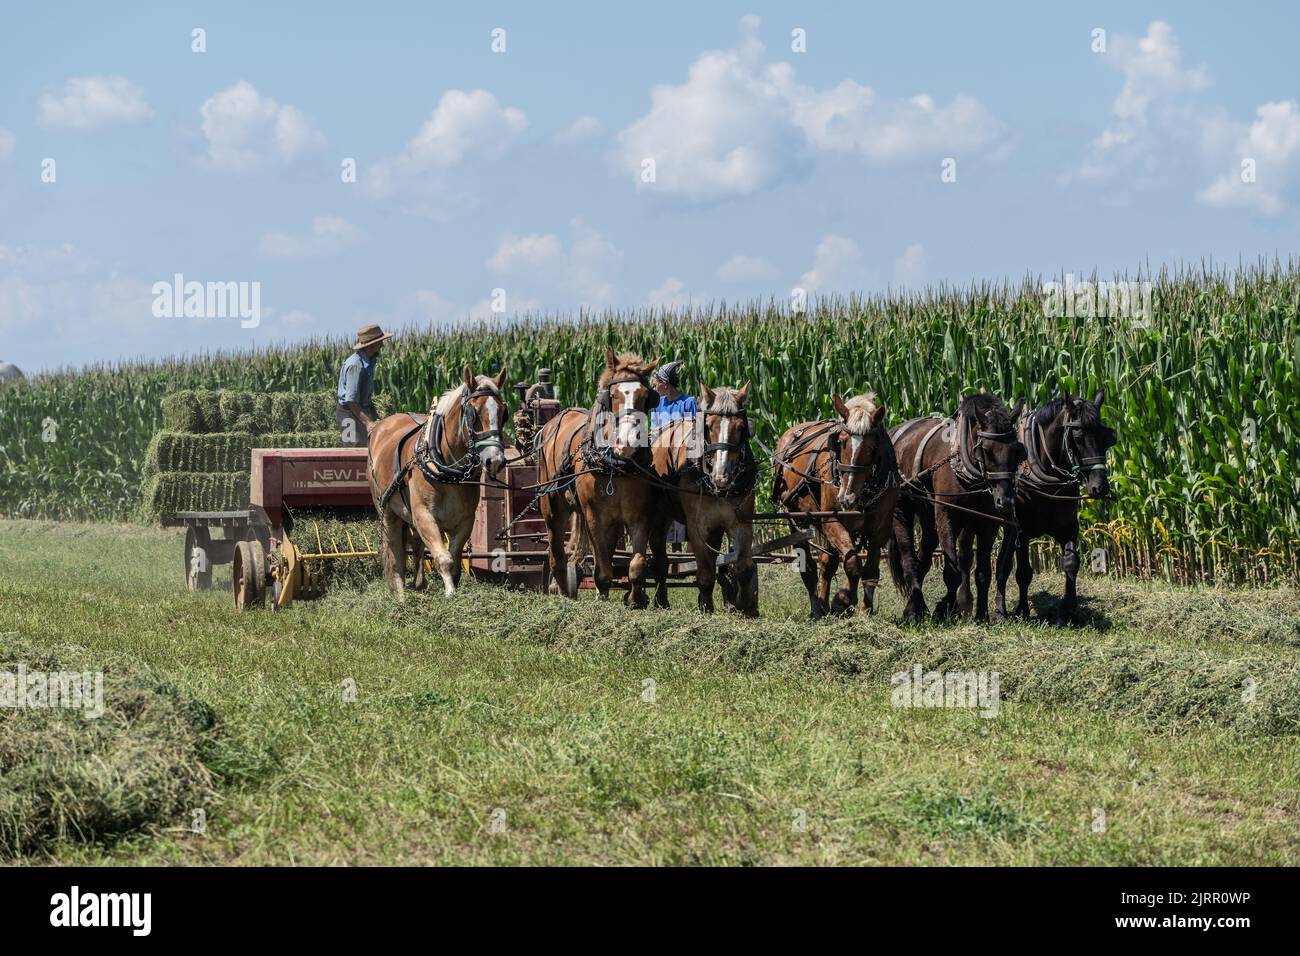 Strasburg, Pennsylvania-August 19, 2022: Amish women and man with horse drawn harvester gather hay bales in farm field Stock Photo